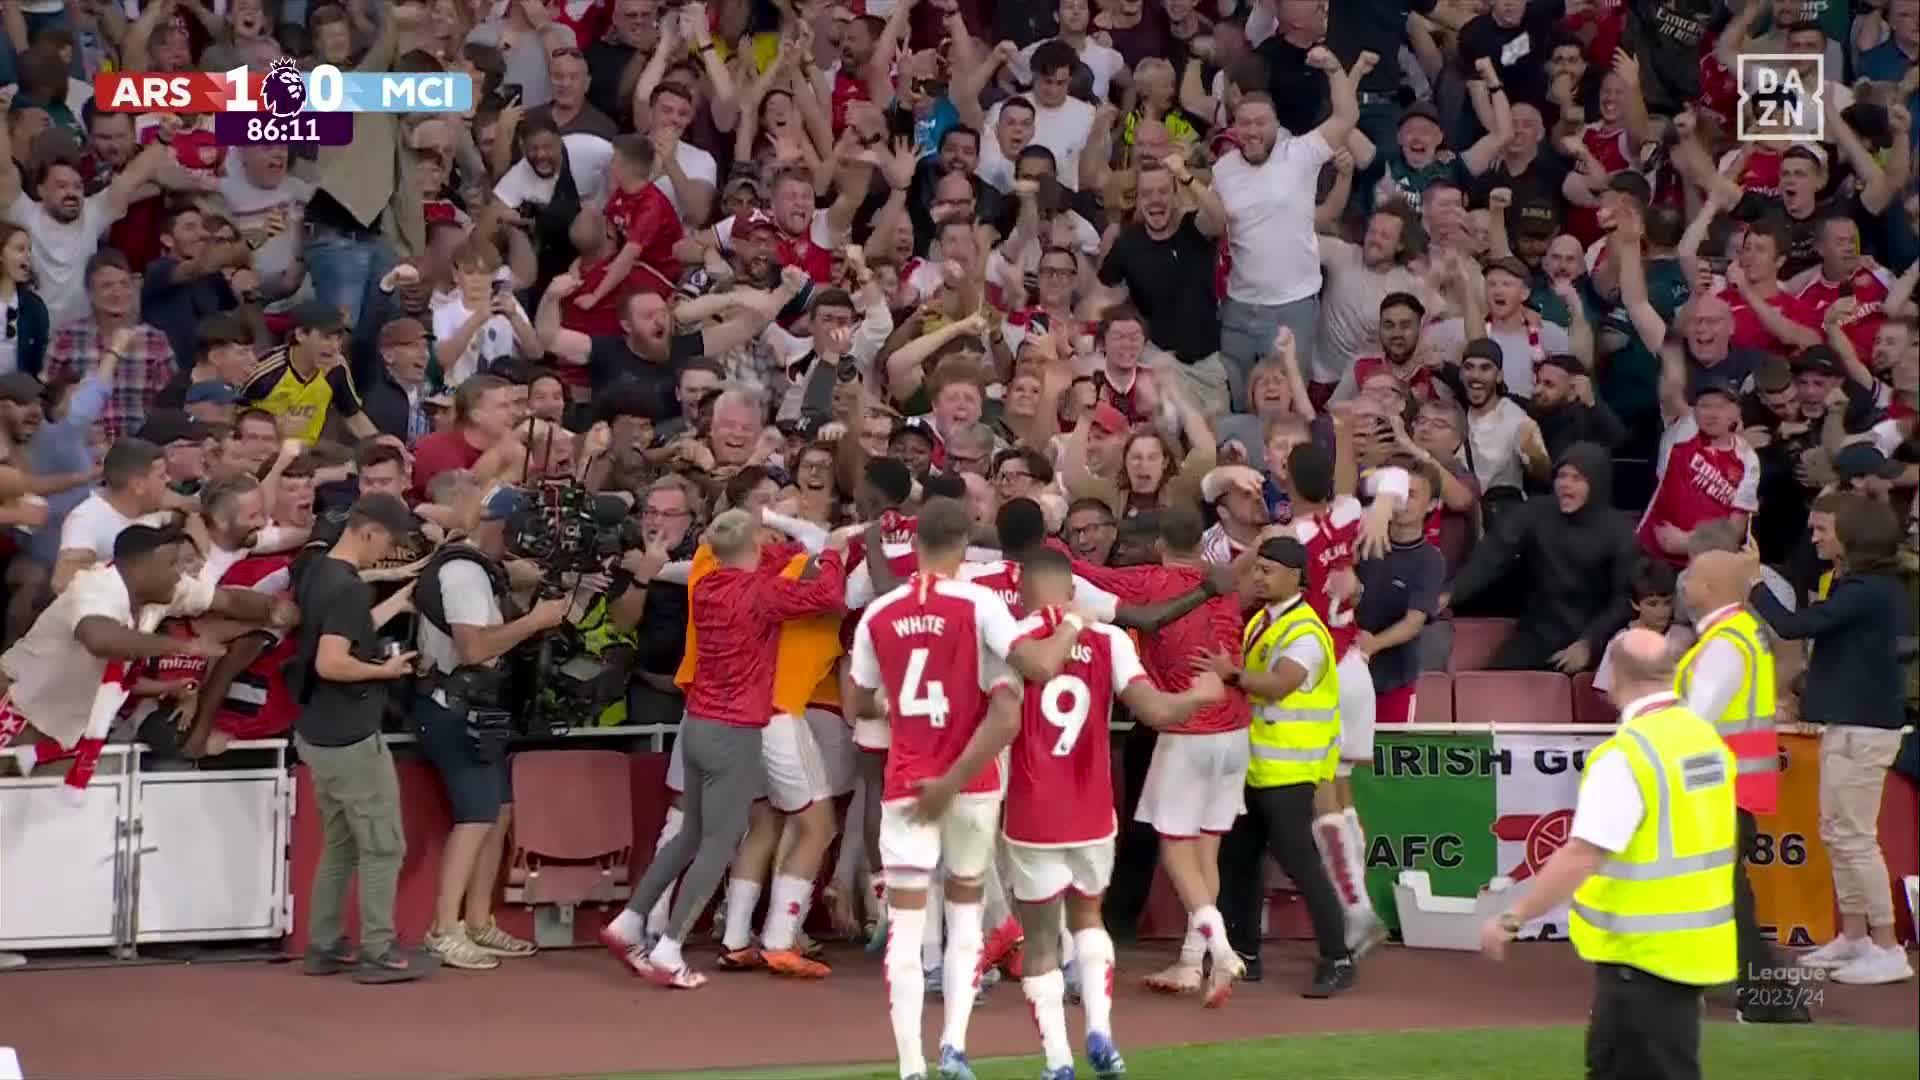 Extended Highlights: Arsenal 1, Manchester City 0